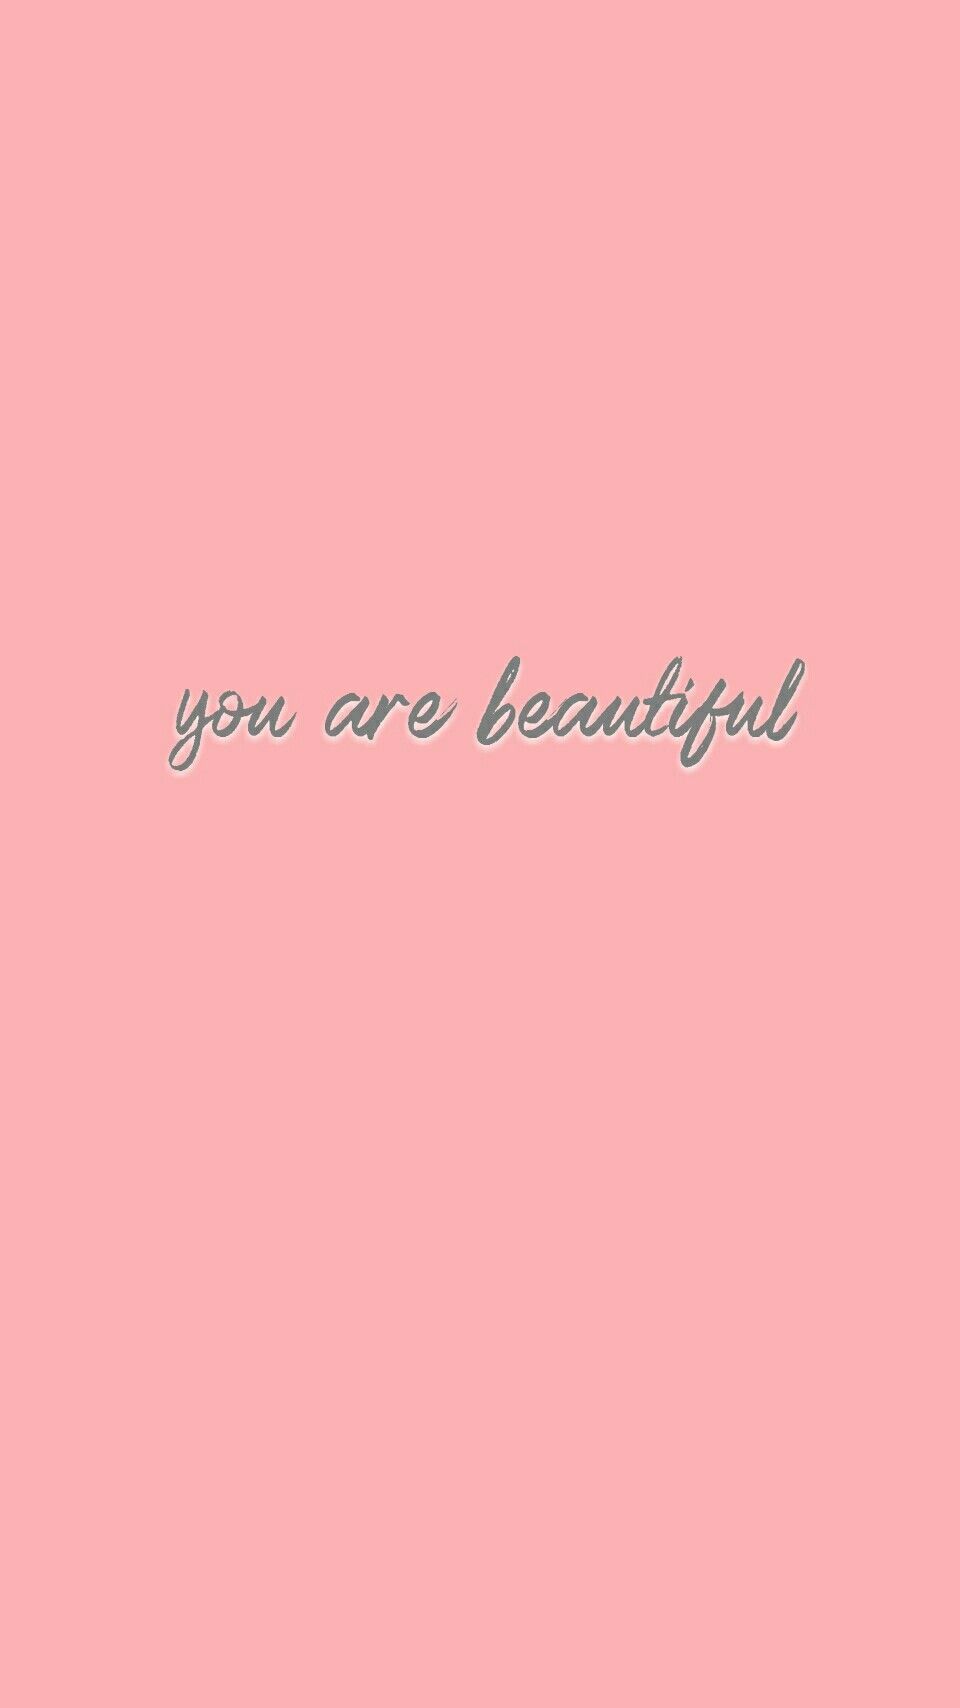 You are beautiful. Phone wallpaper. You are beautiful, Phone wallpaper, Wallpaper